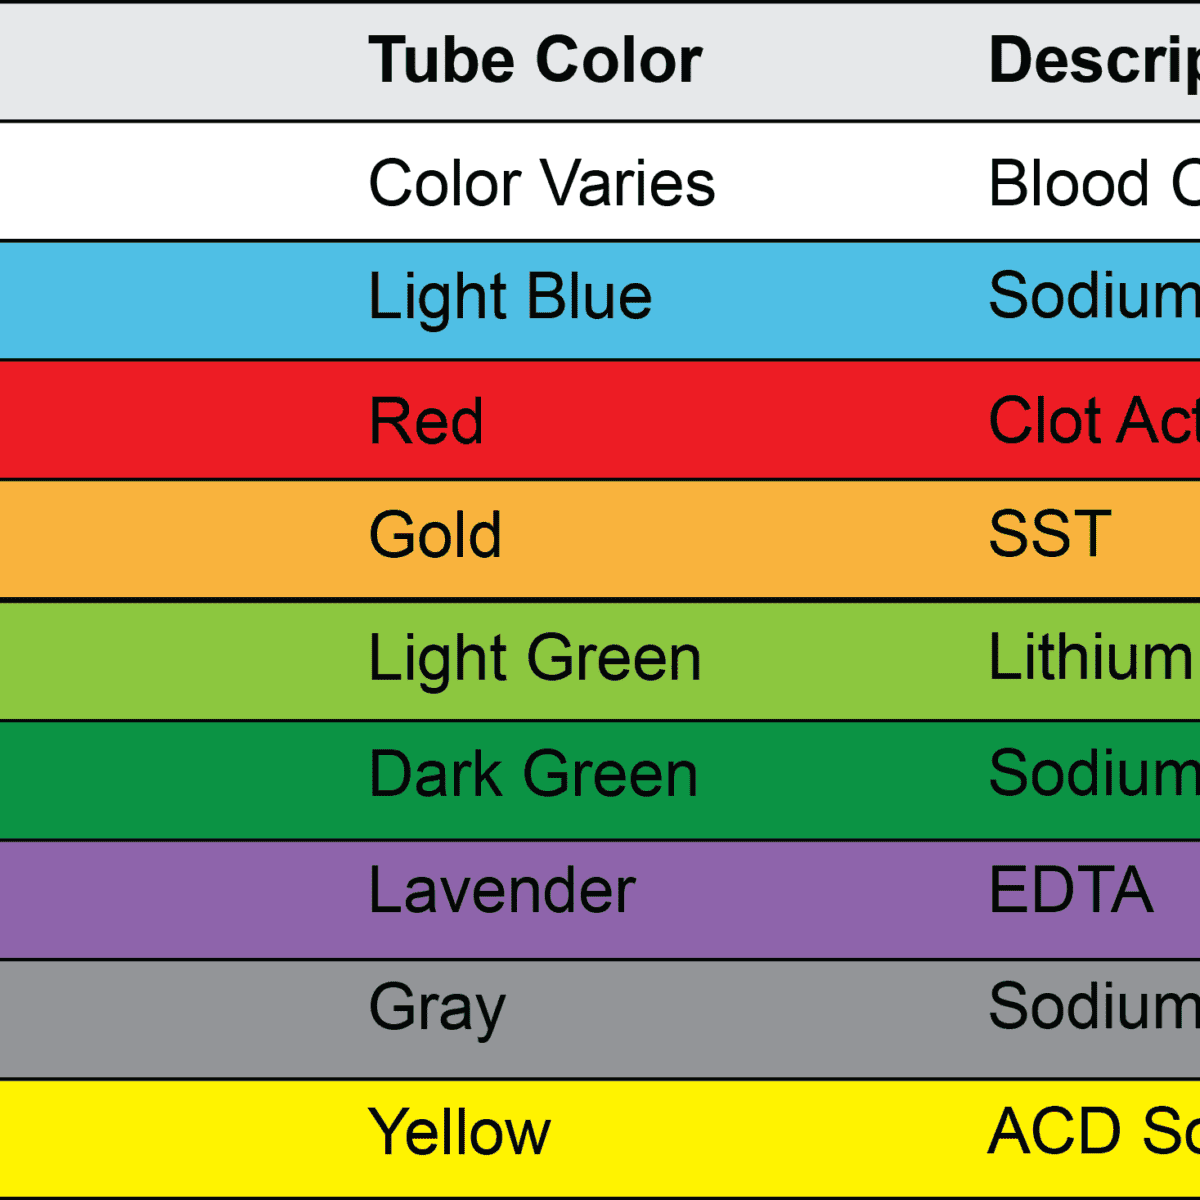 Order of Draw for Phlebotomy & Study Guide - PhlebotomyU